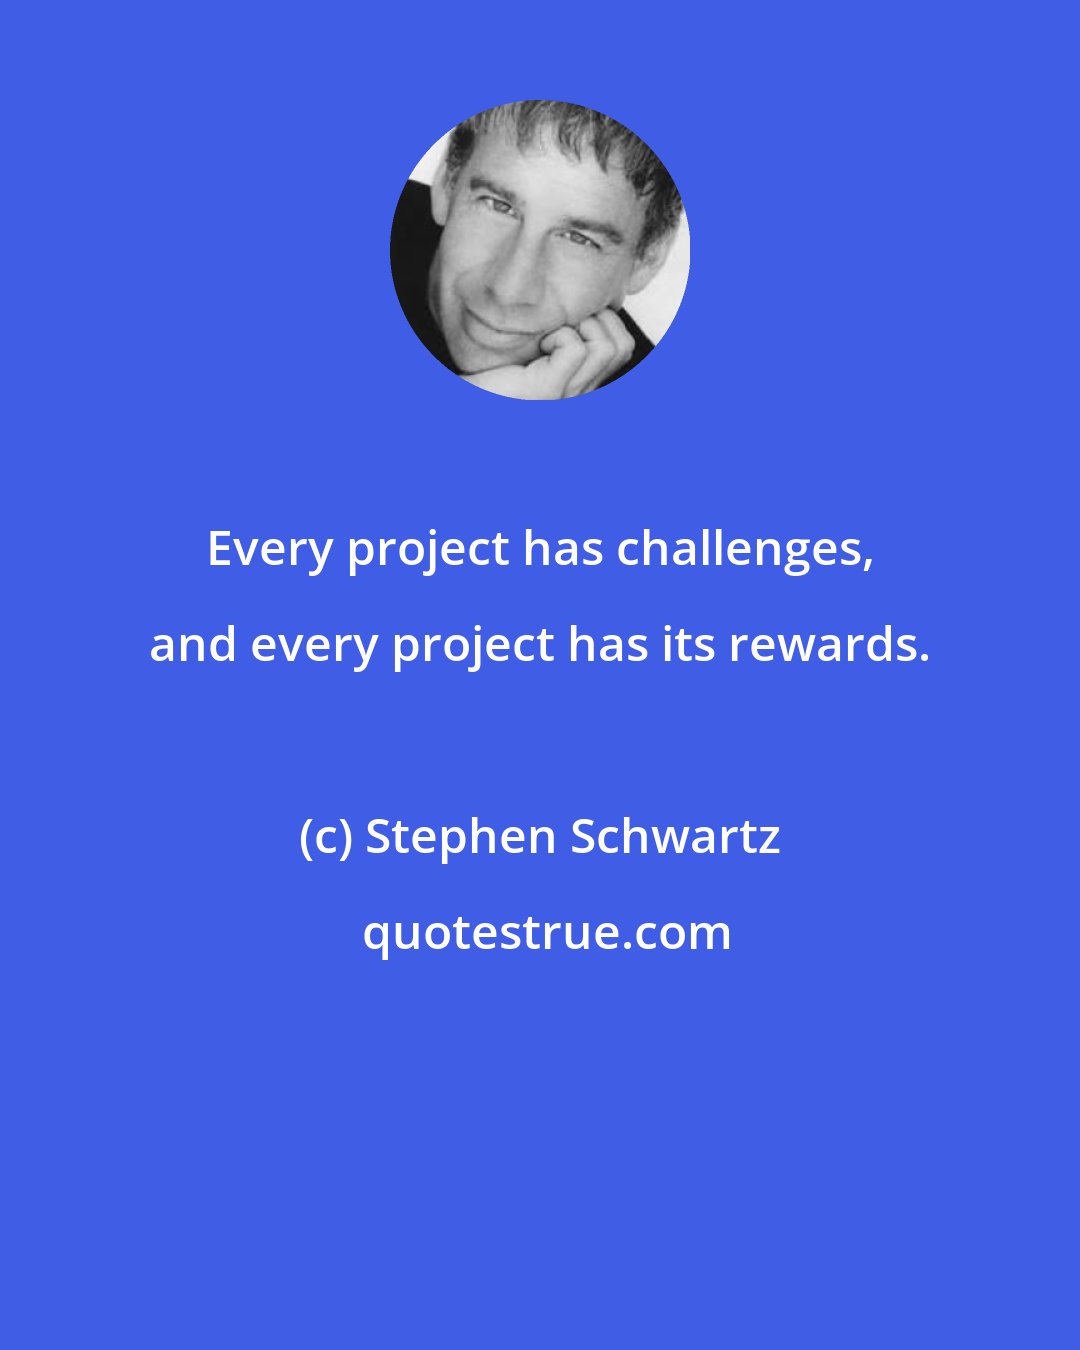 Stephen Schwartz: Every project has challenges, and every project has its rewards.